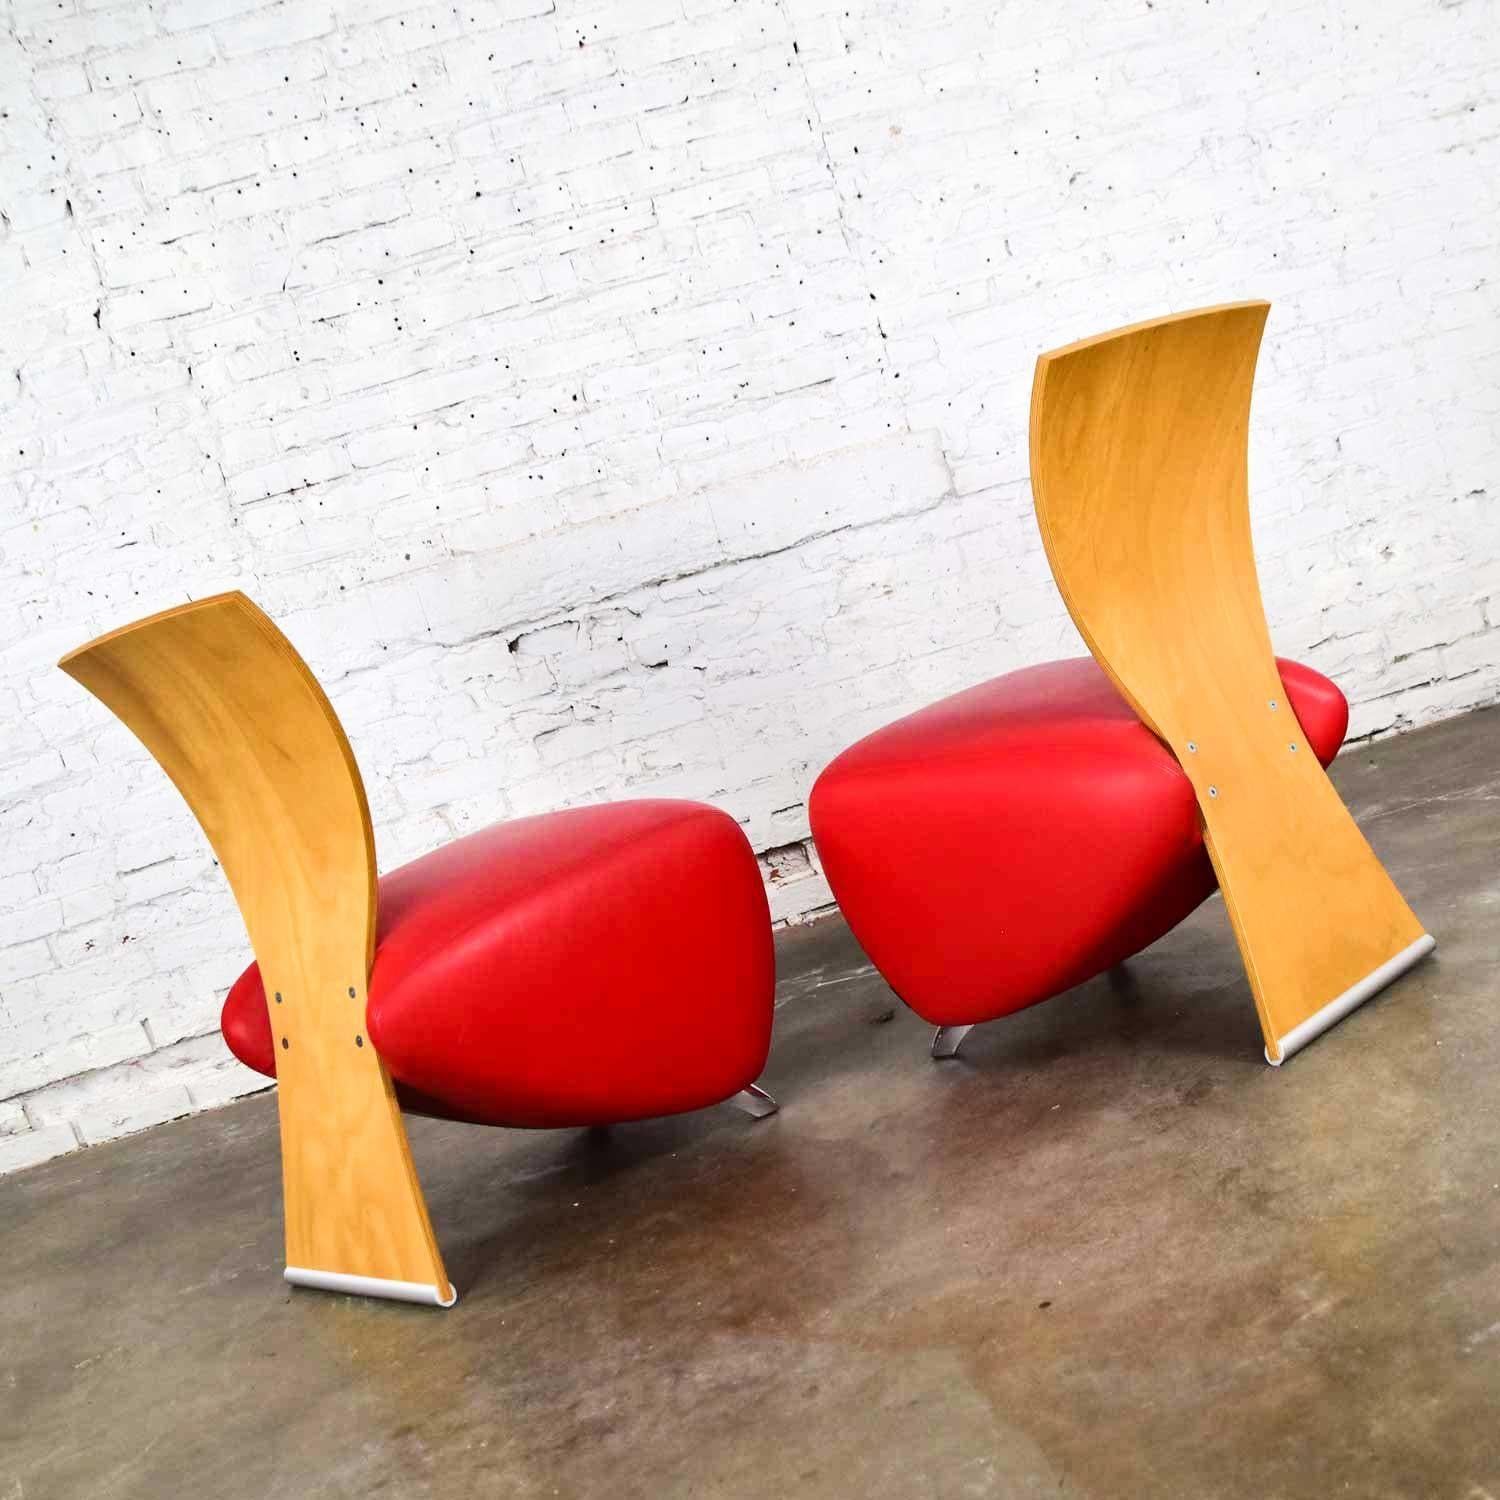 Polished Dauphin BOBO Postmodern Accent Chairs by Dietmar Sharping Red Leather and Maple For Sale